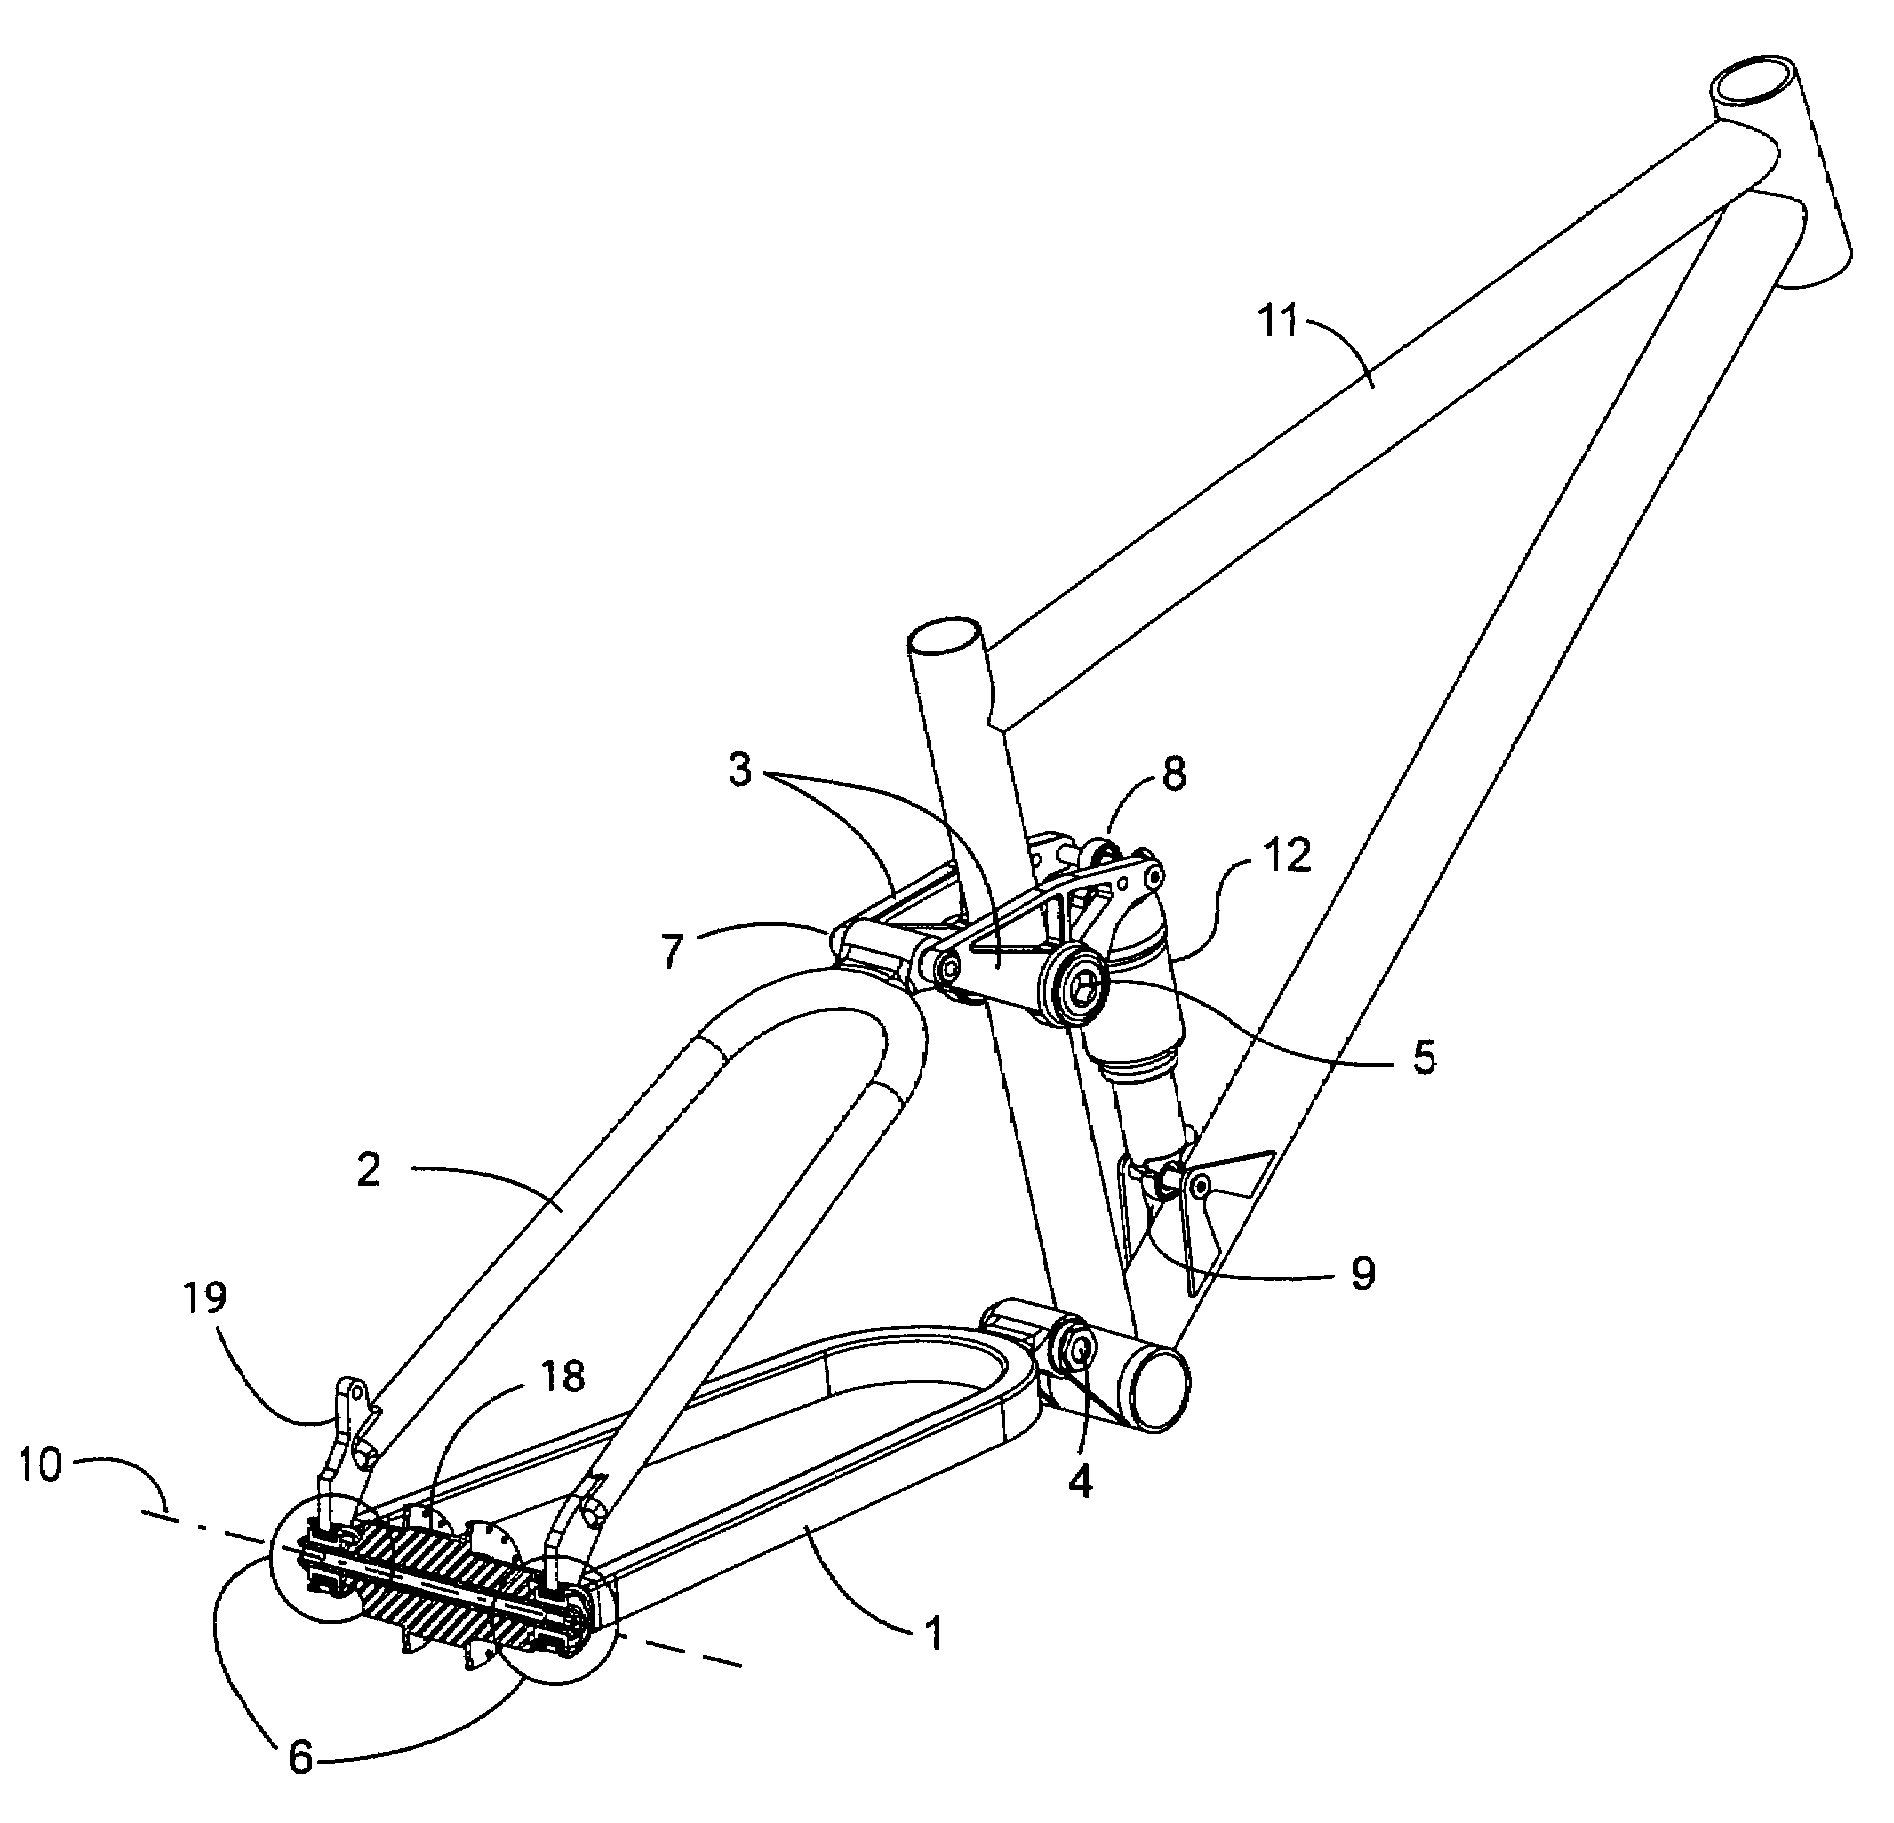 Vehicle suspension systems for seperated acceleration responses